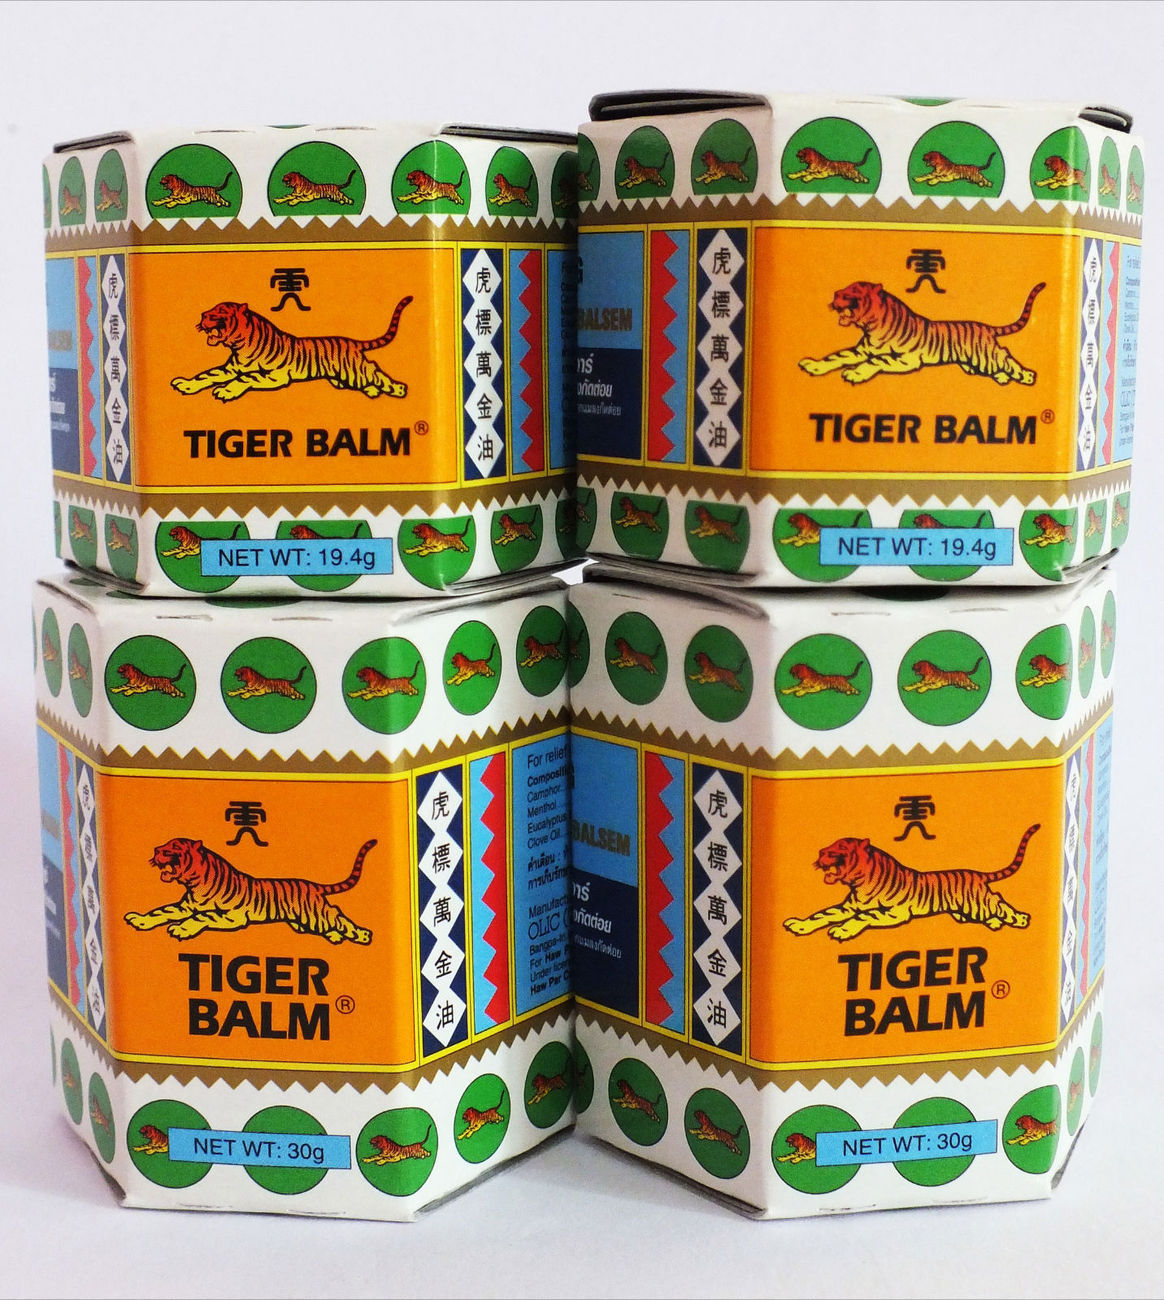 TIGER BALM WHITE Ointment Relief Muscular Aches Pains Flatulence 30 g